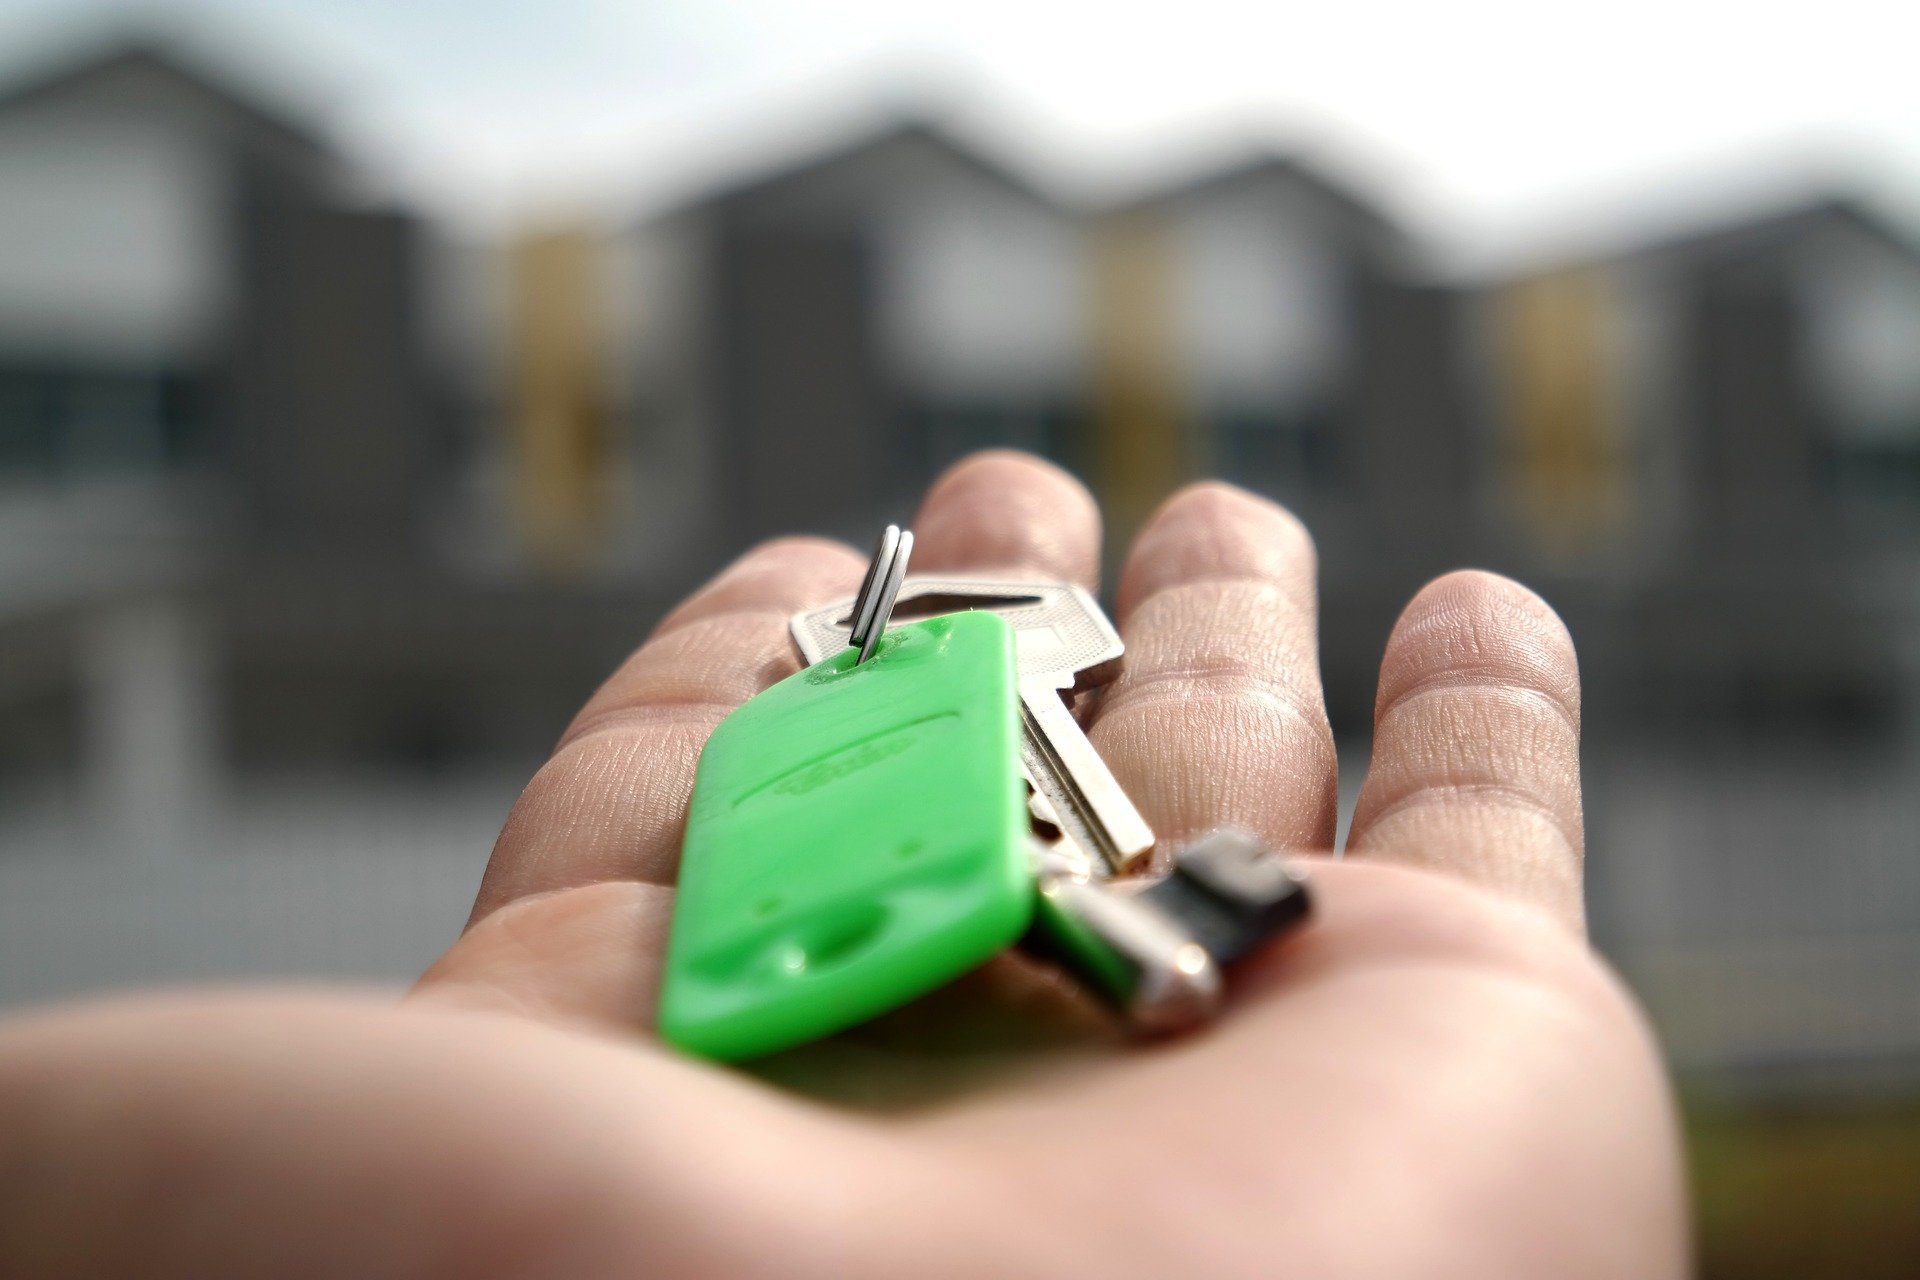 Scrap €10k AML Monthly Rent Limit for Letting Agencies, say Propertymark